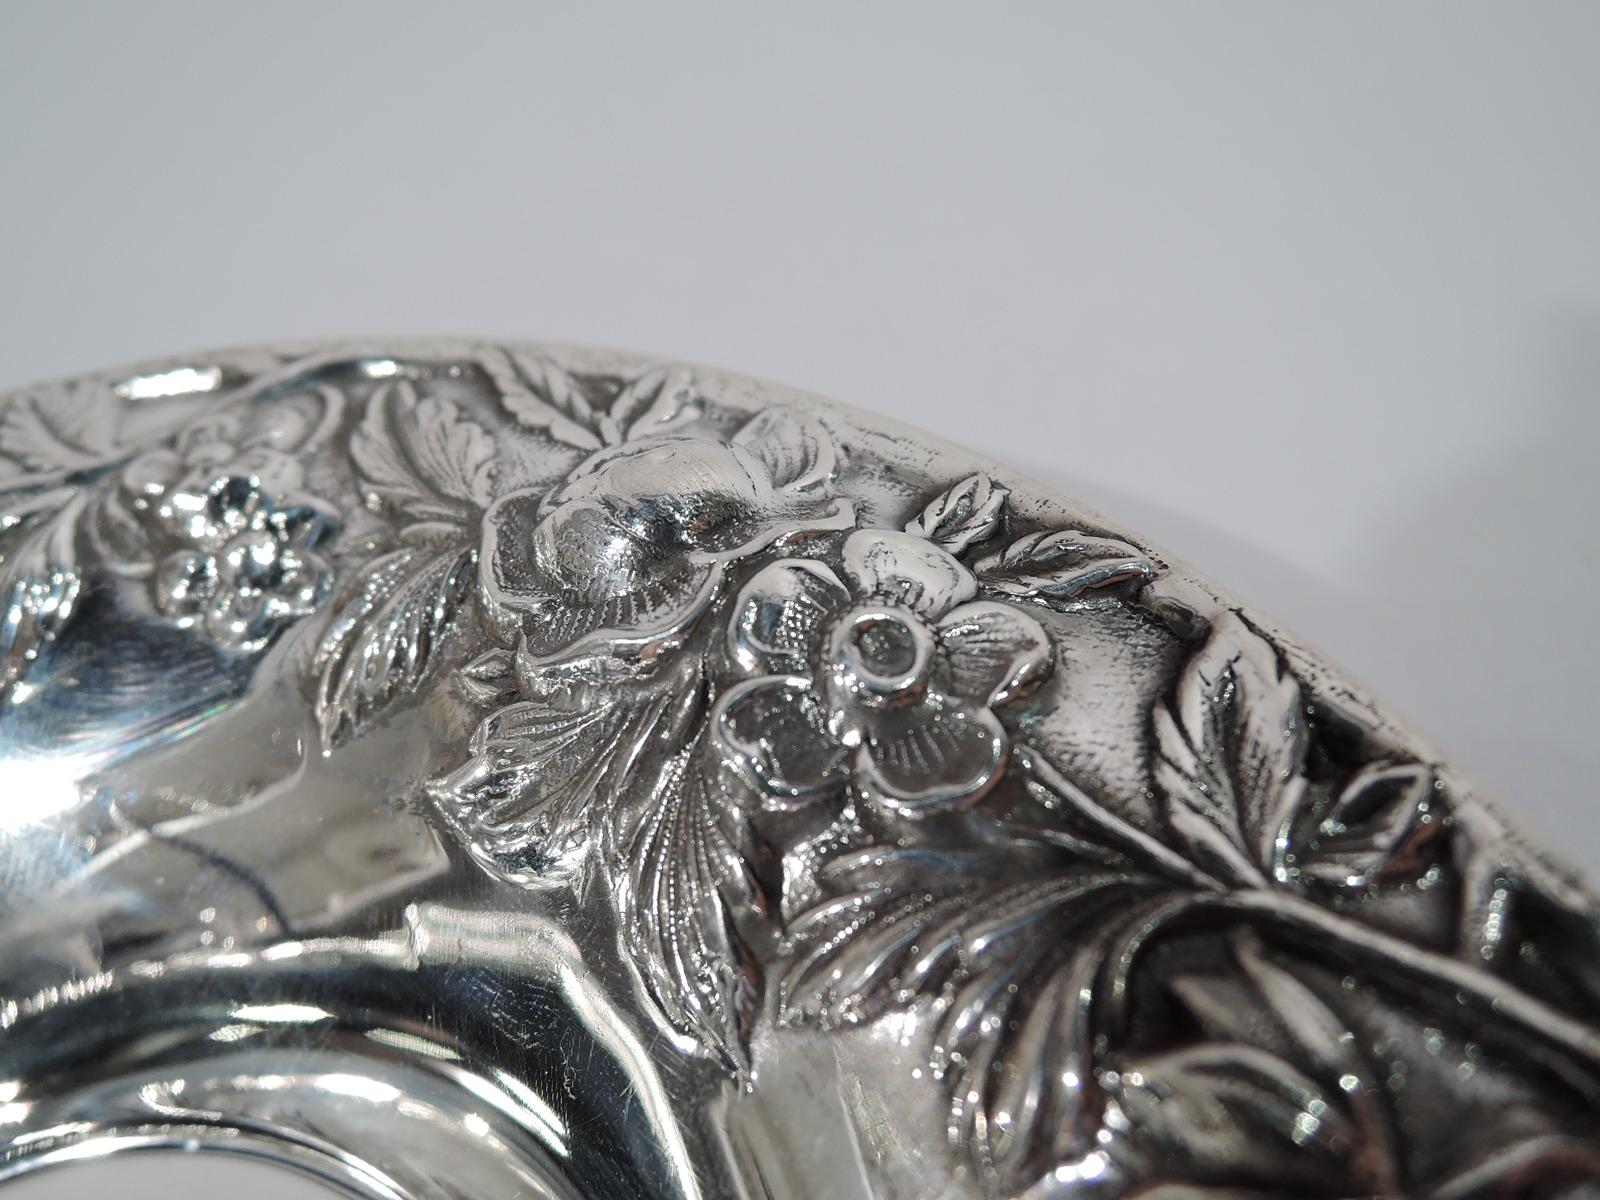 American Pretty Old-Fashioned Baltimore Repousse Sterling Silver Bowl by Kirk